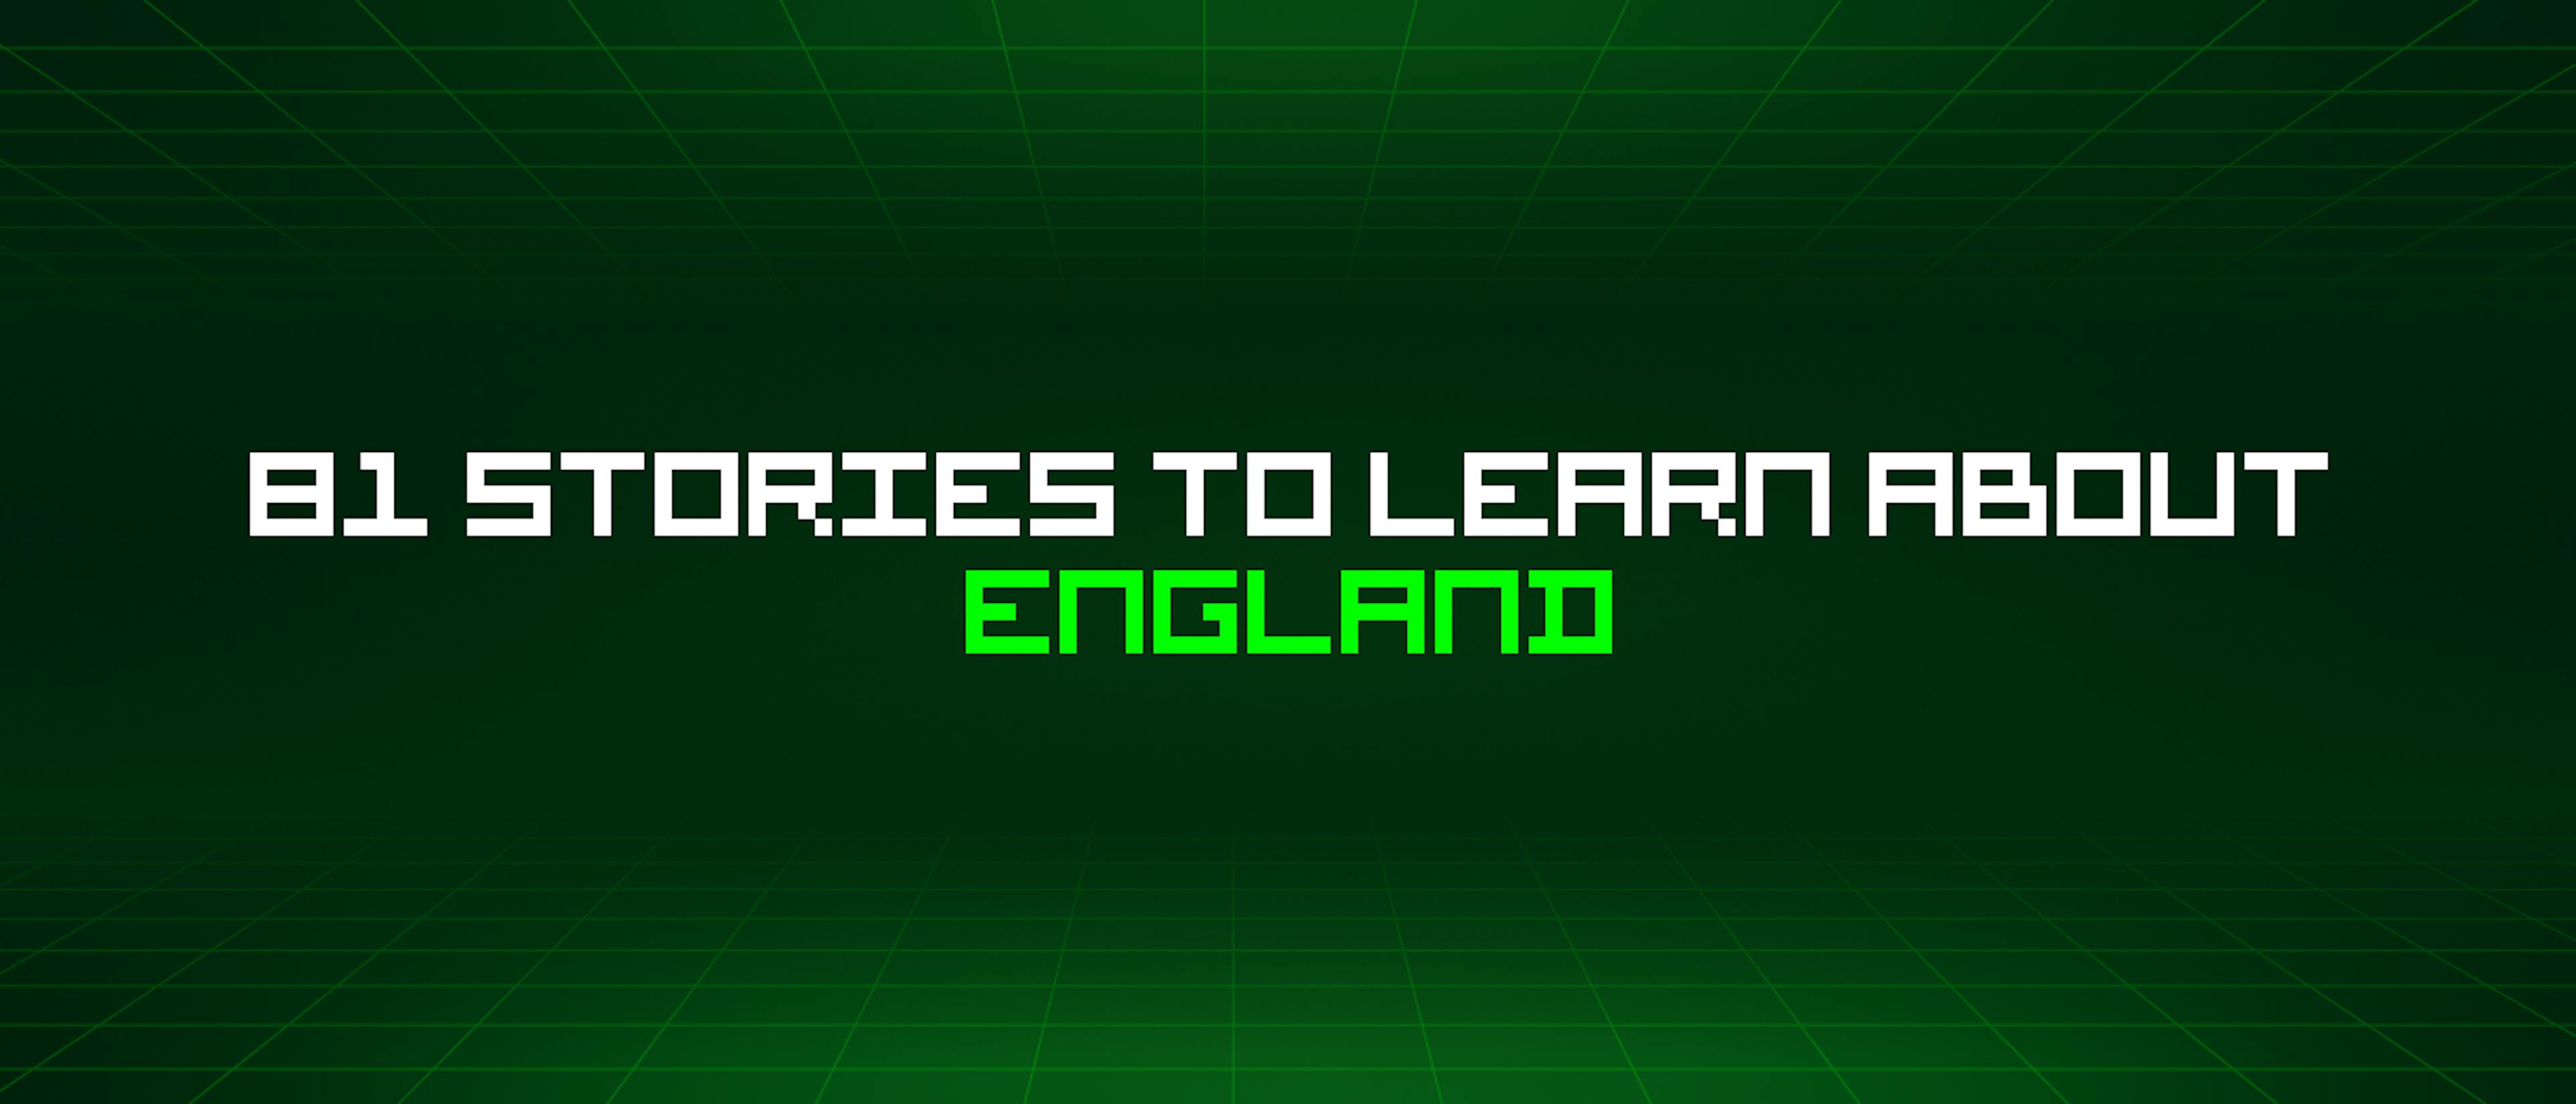 featured image - 81 Stories To Learn About England